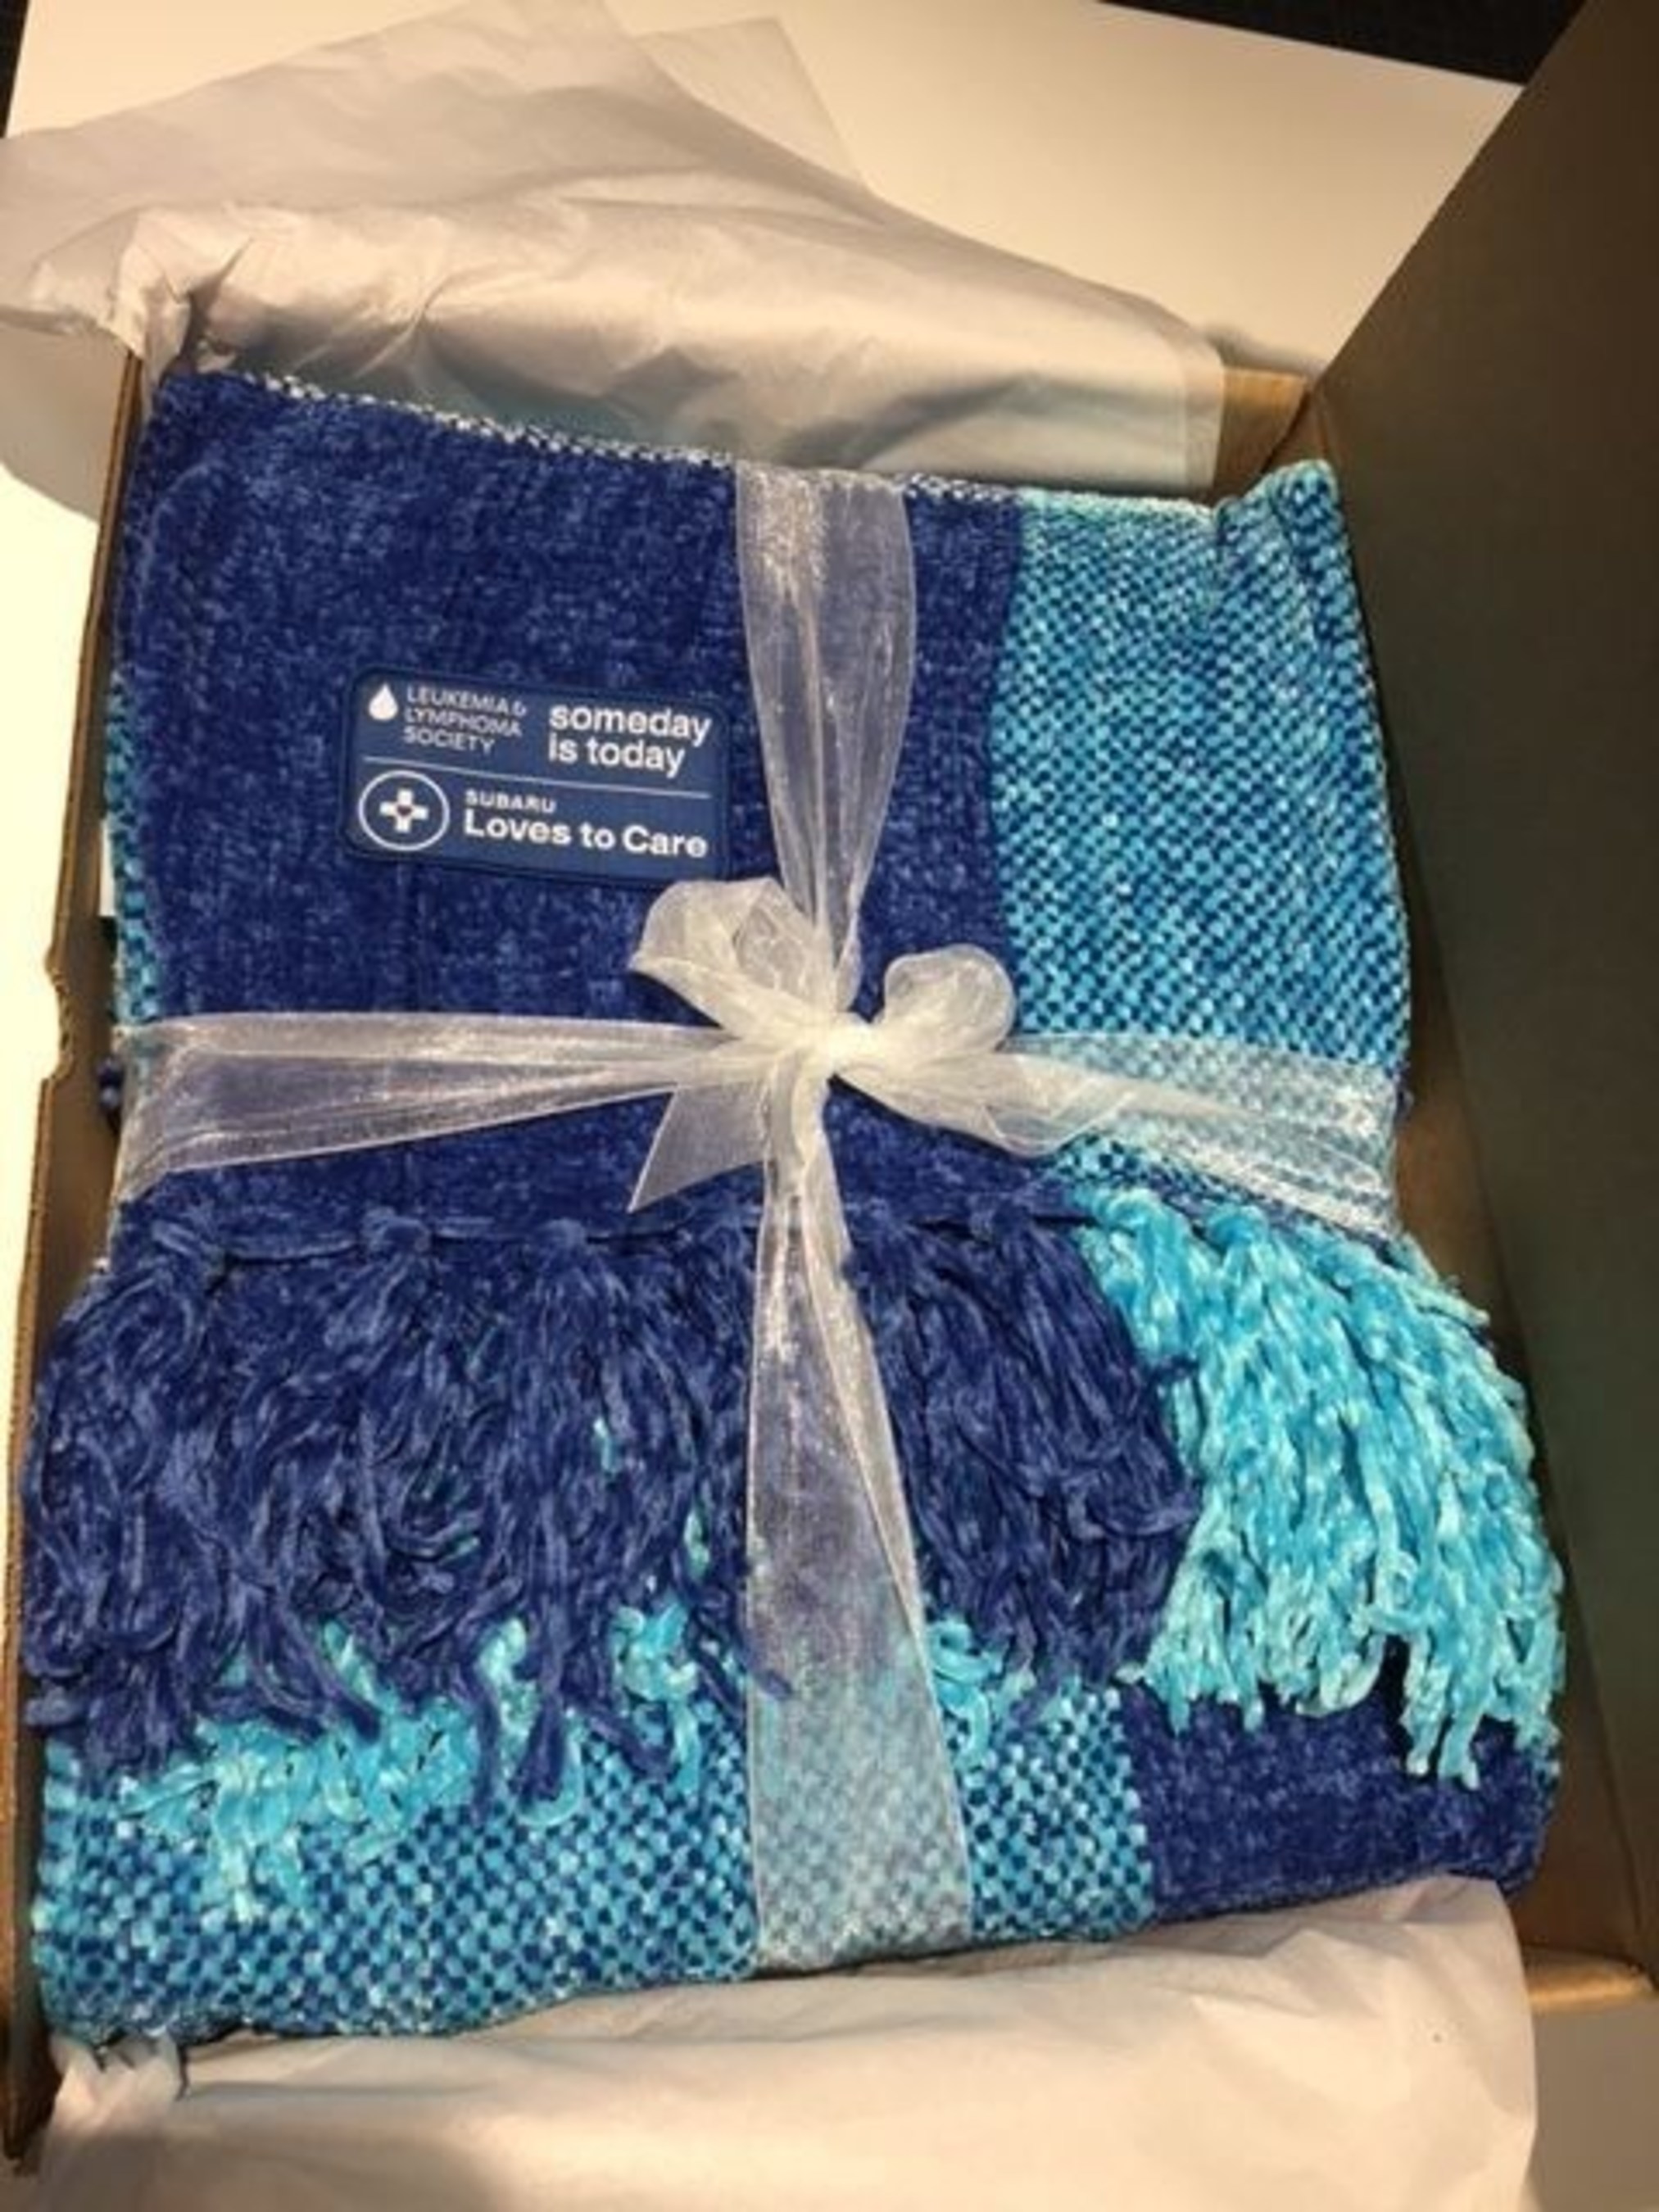 During Subaru Loves to Care month this June, The Leukemia & Lymphoma Society and participating Subaru retailers across the country together will provide blankets and messages of hope to patients undergoing cancer treatment at local hospitals and treatment centers.